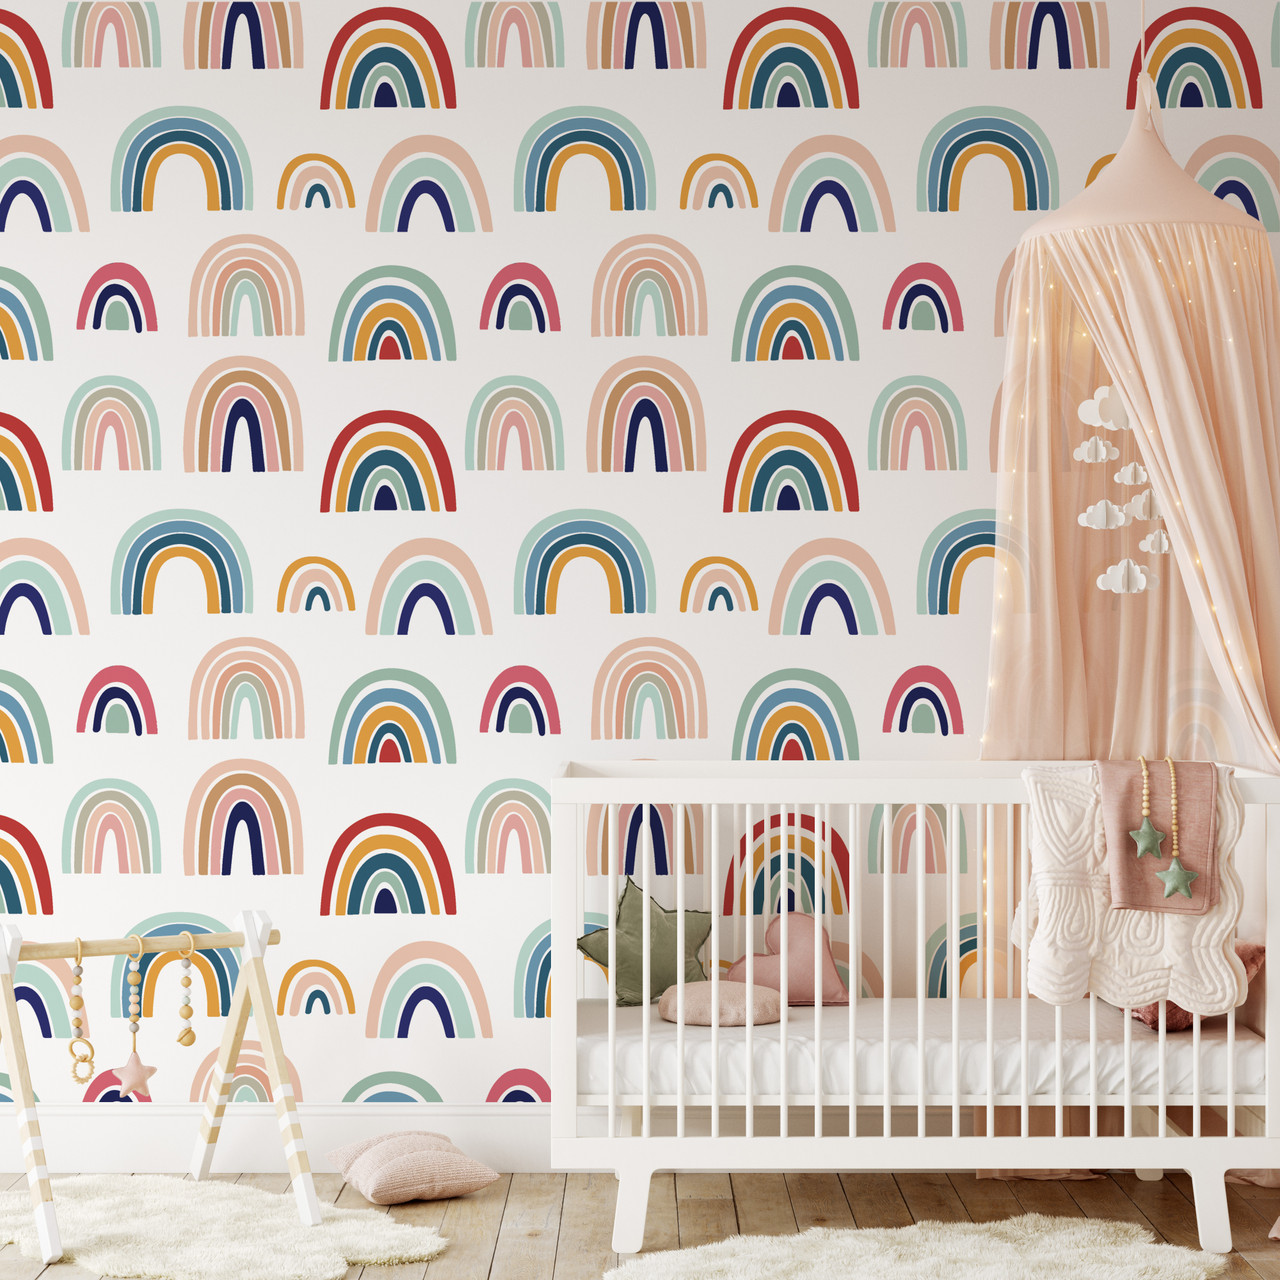 Abstract rainbow wallpaper  Peel and Stick or NonPasted  Save 25